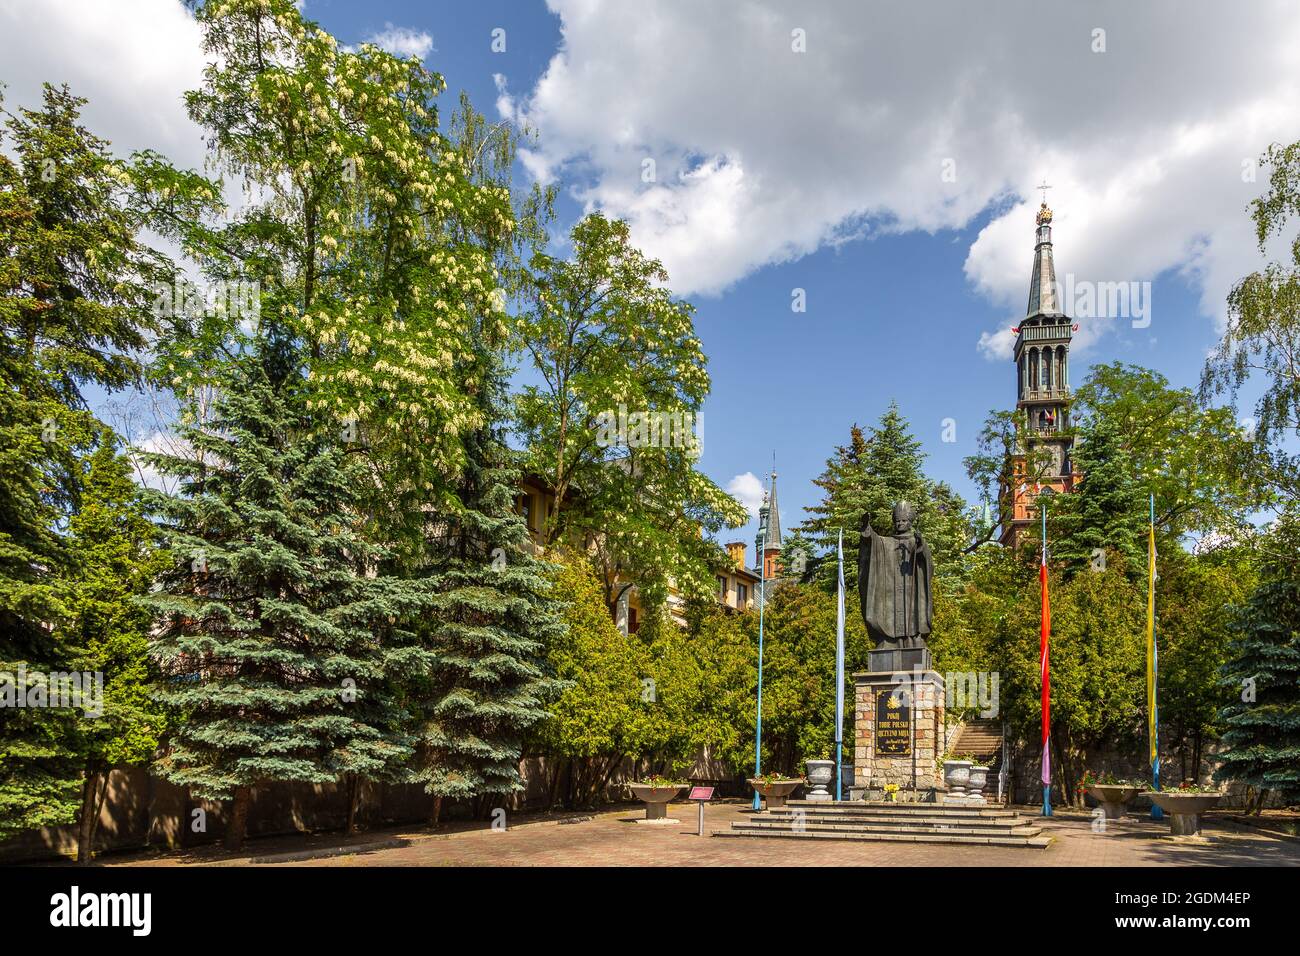 Lichen Stary, Poland - 25 May 2016: Monument to Pope John Paul II in front of the Saint Dorothy, neo-gothic parish church. Stock Photo